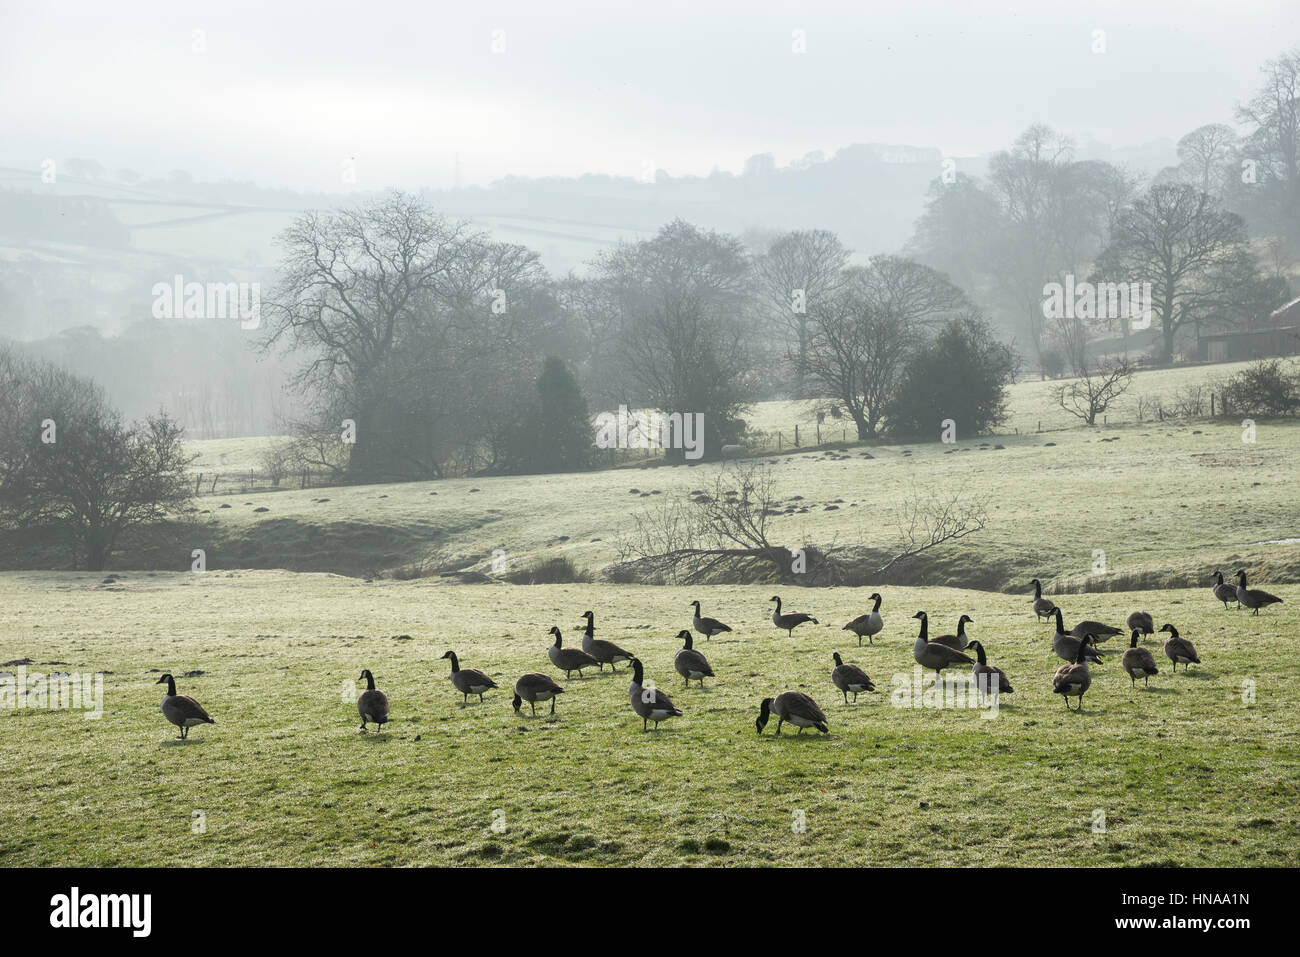 Flock of geese in a field of dewy grass on a misty winter morning in the English countryside. Stock Photo